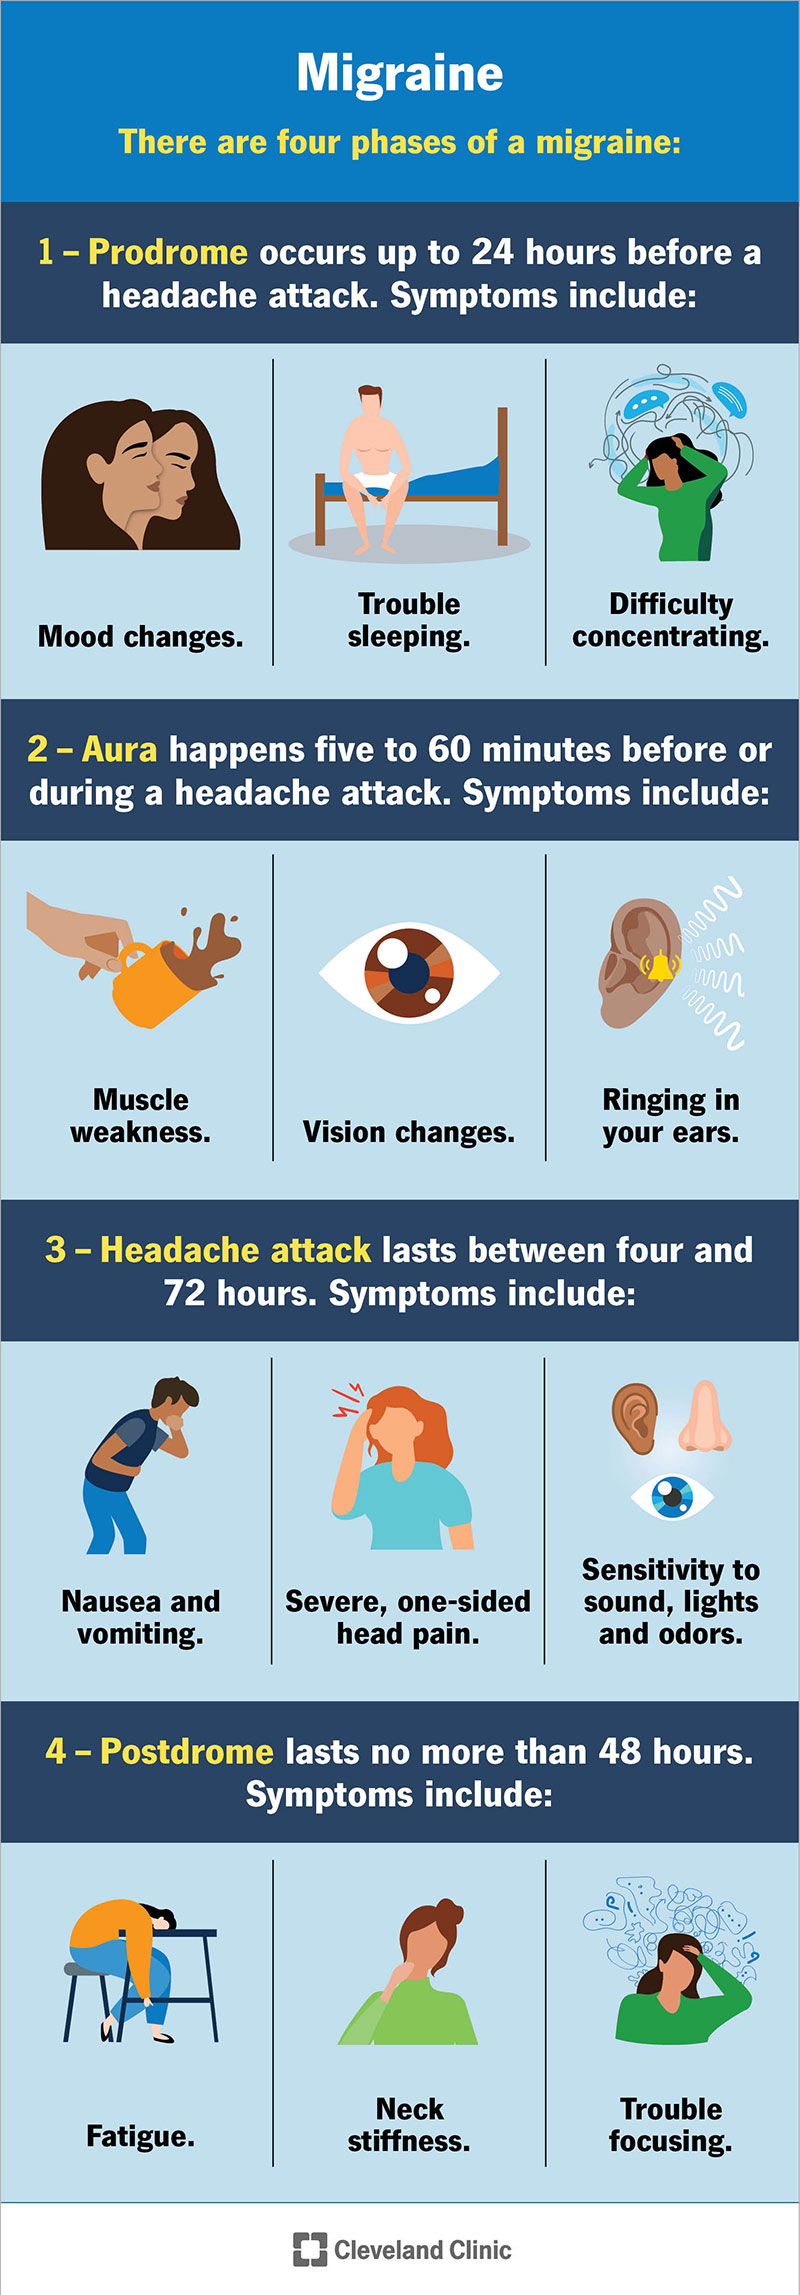 The four phases and common symptoms of a migraine